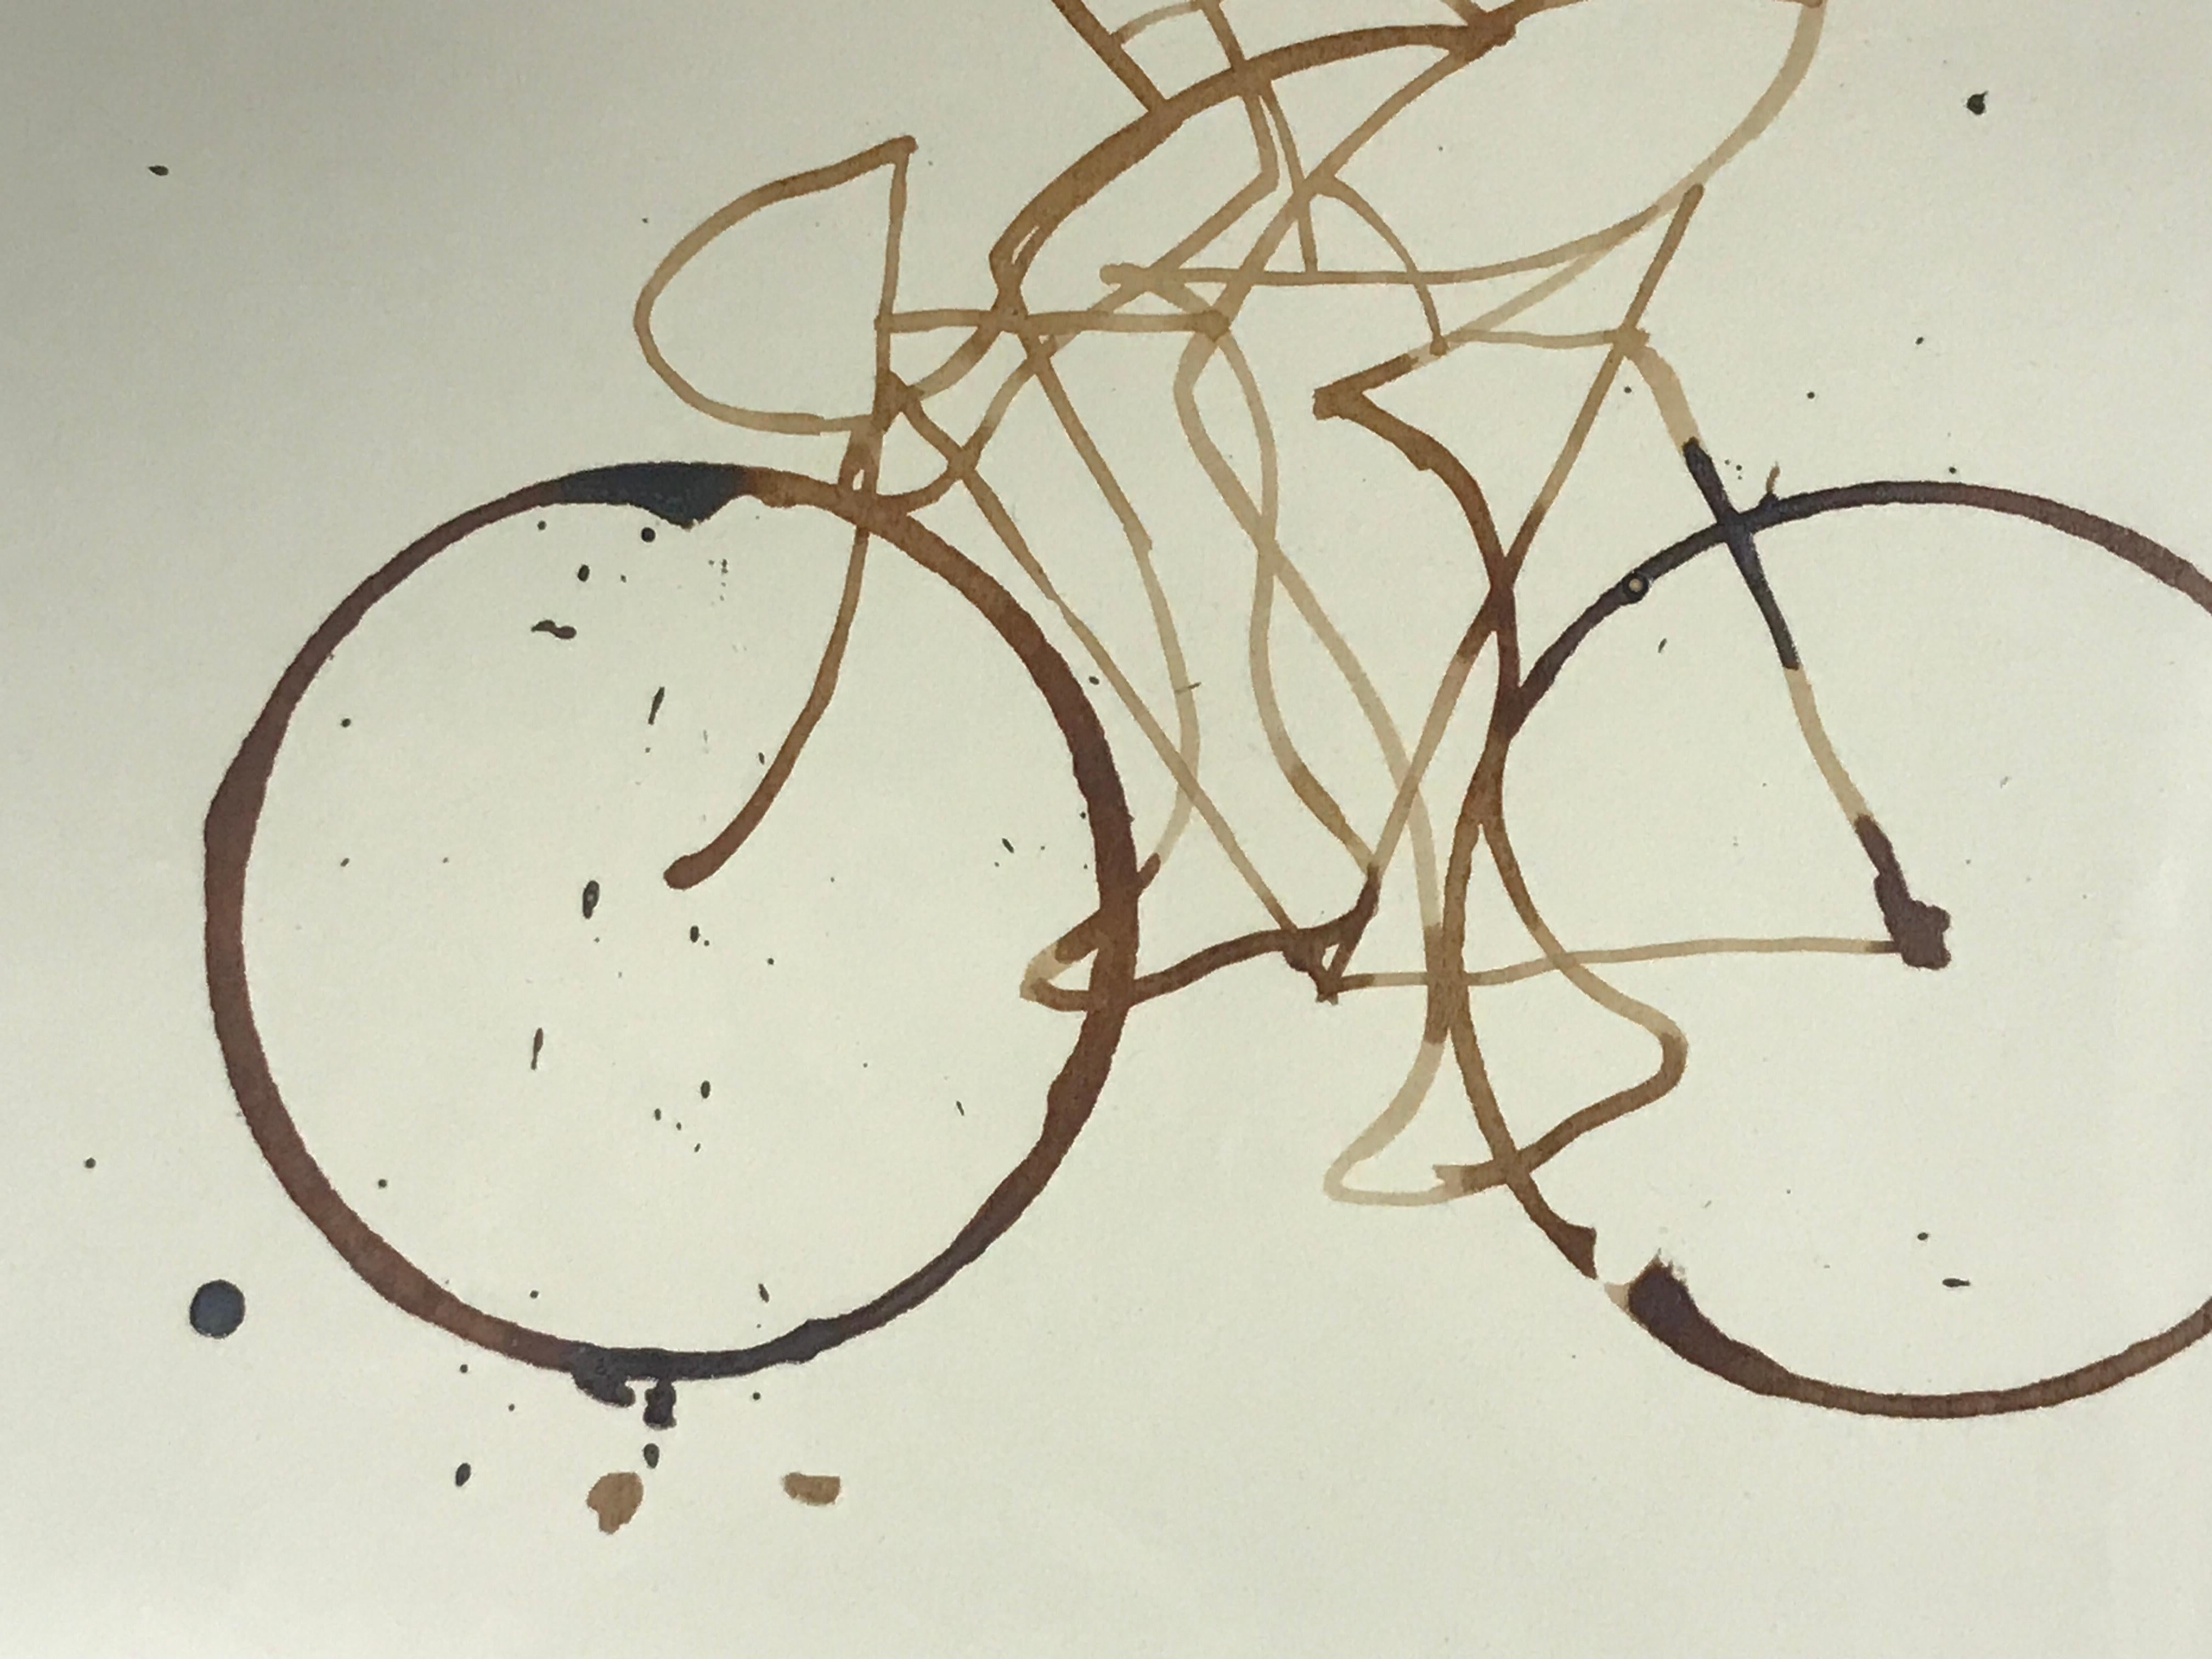 Original Artwork of cyclists, made from specially treated coffee and then submitted to a further setting treatment so the artwork will last

Complete size of sheet: 42 x 59.4 cm

ADDITIONAL INFORMATION:
Coffee Break (CB02_nov23) by Eliza